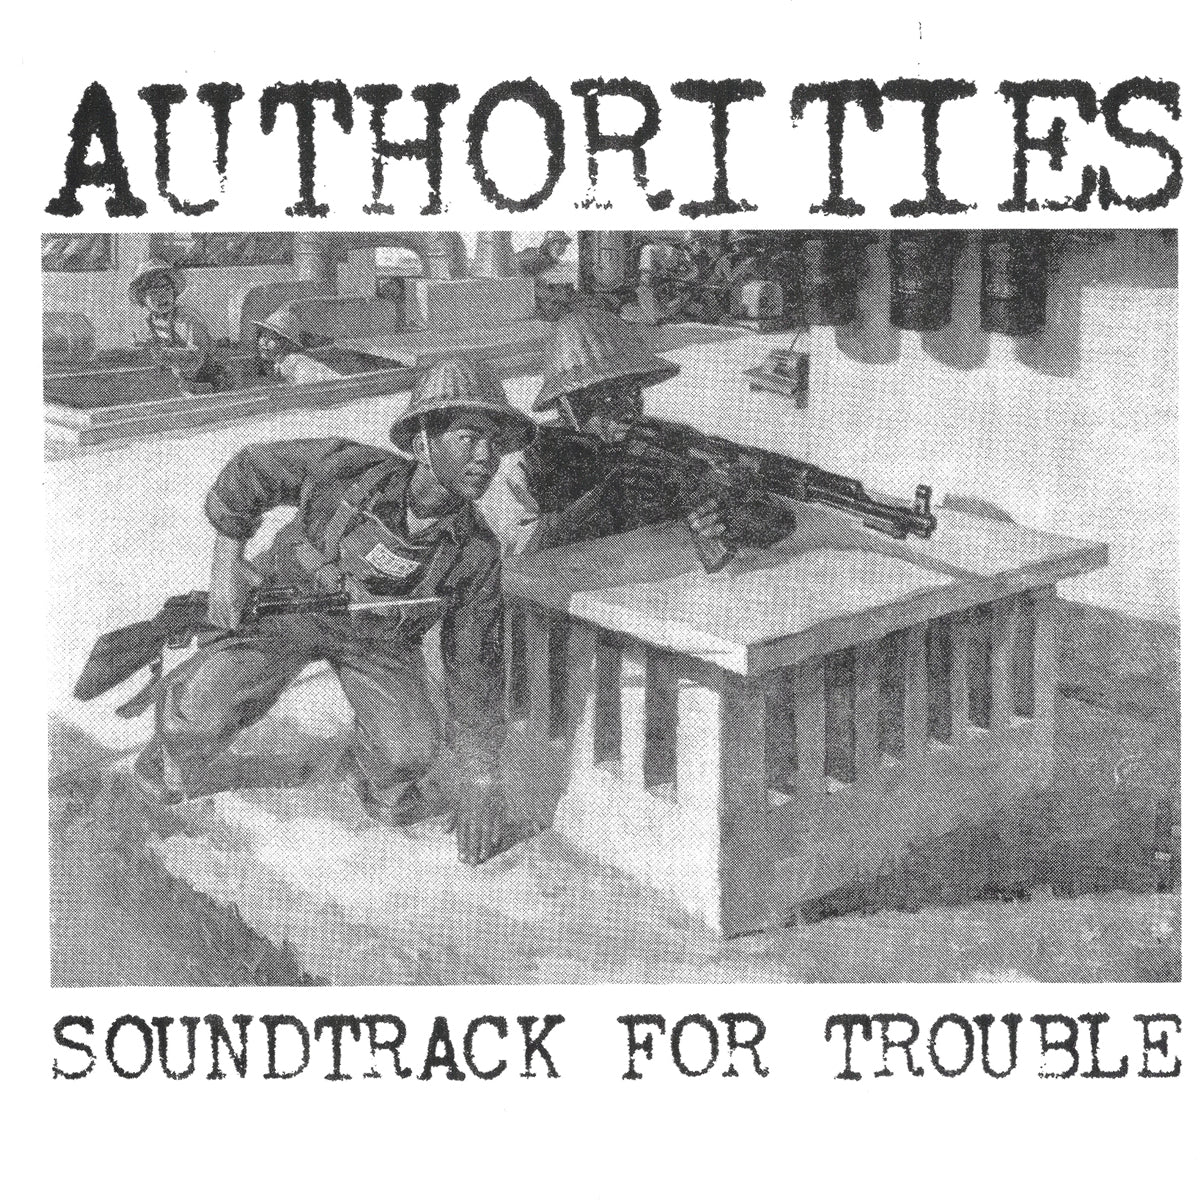 Authorities- Soundtrack For Trouble 7" ~REISSUE!